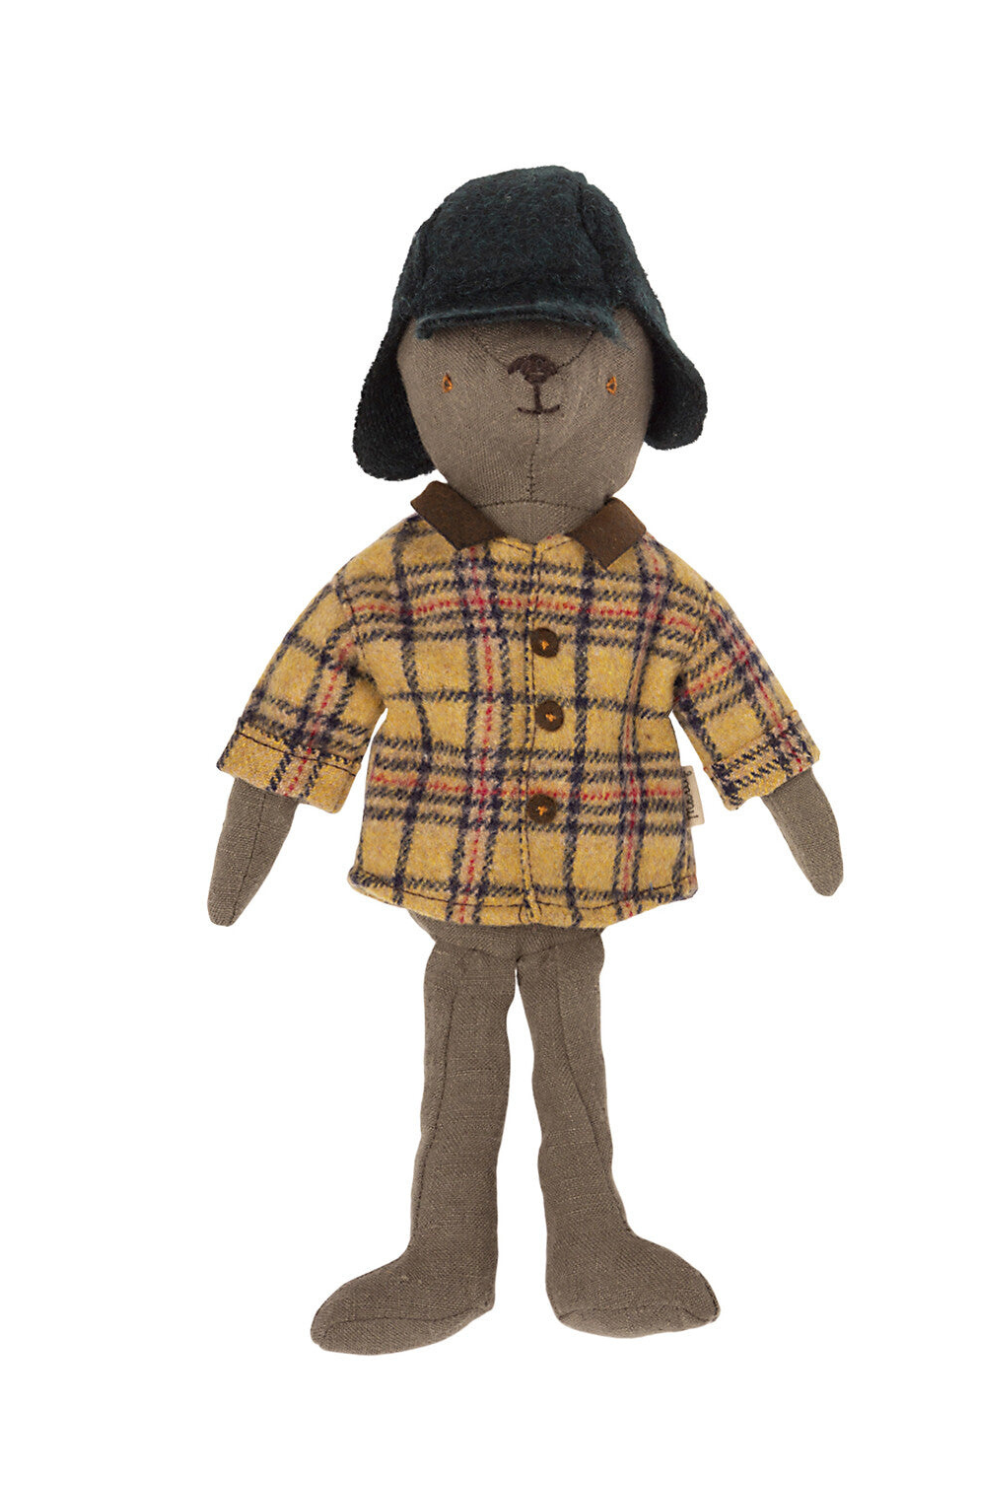 Teddy Dad Woodsman Outfit: Stylish Costume for Plush Bears